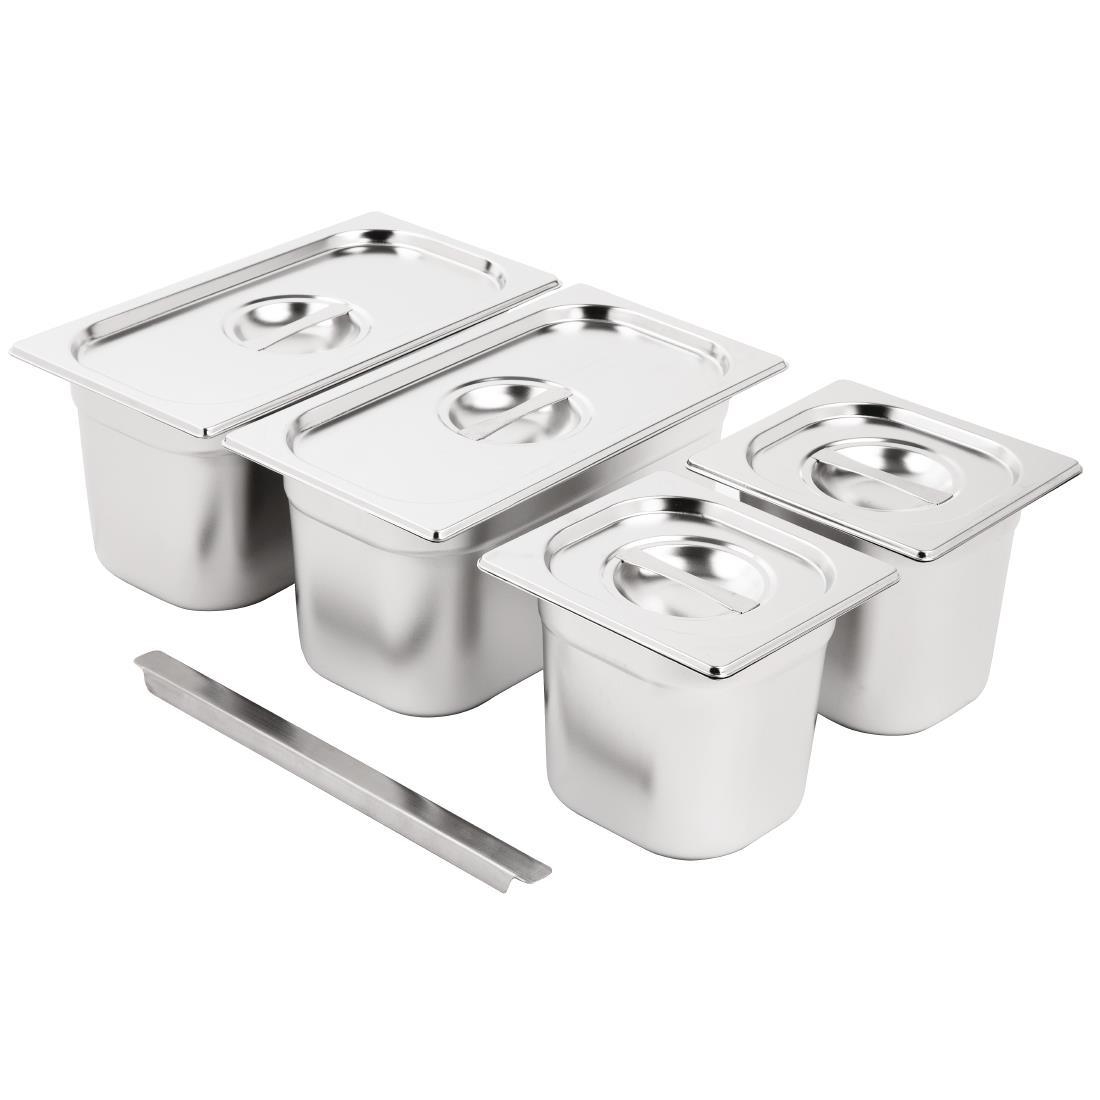 Vogue Stainless Steel Gastronorm Pan Set 2x 1/3 2 x 1/6 with Lids - SA249  - 1